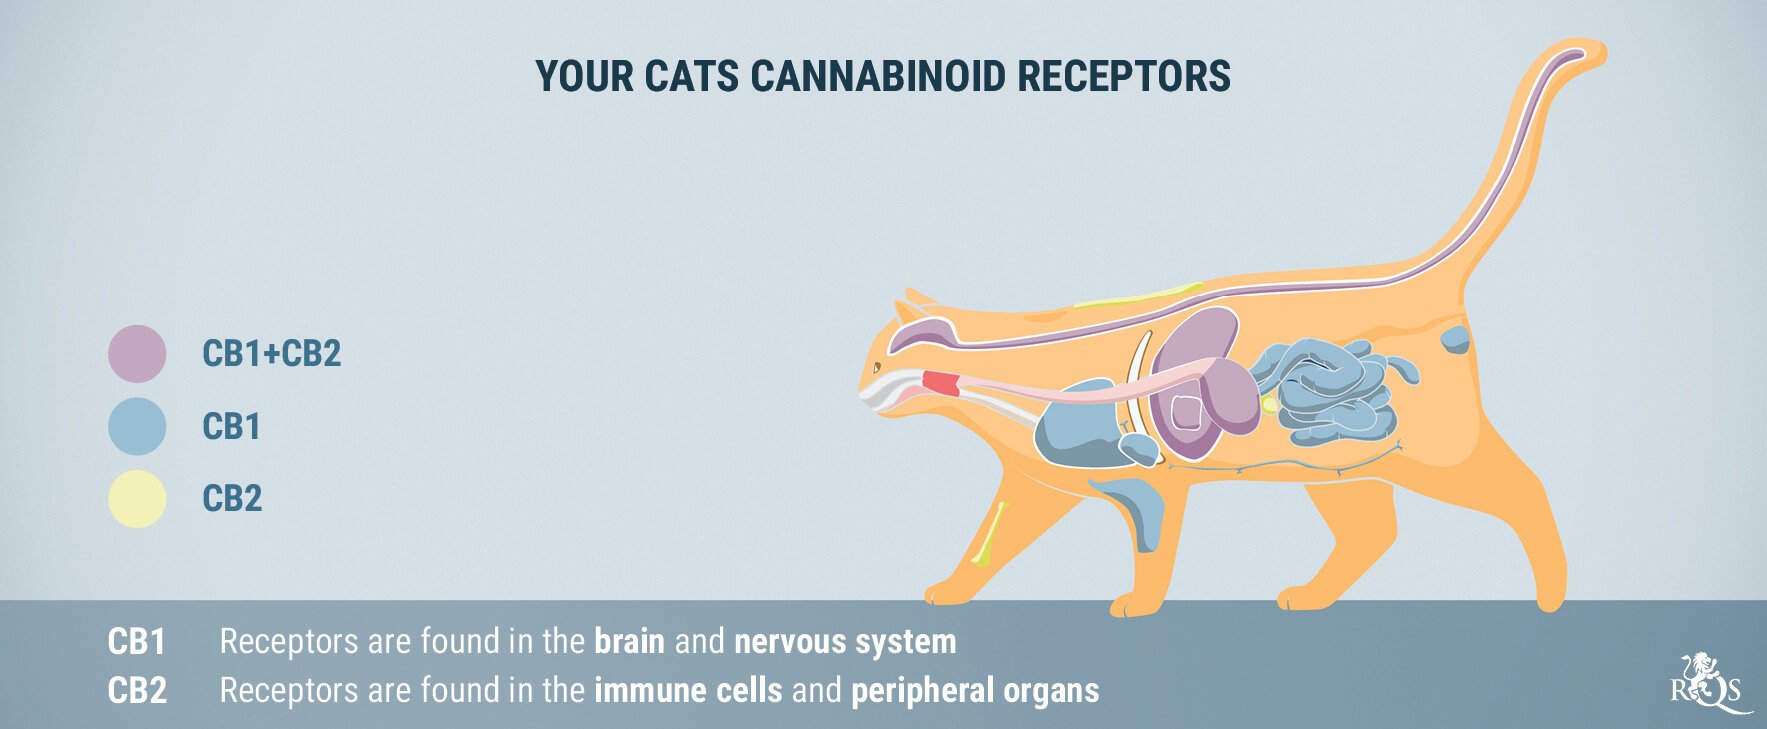 How Does CBD For Cats Work?